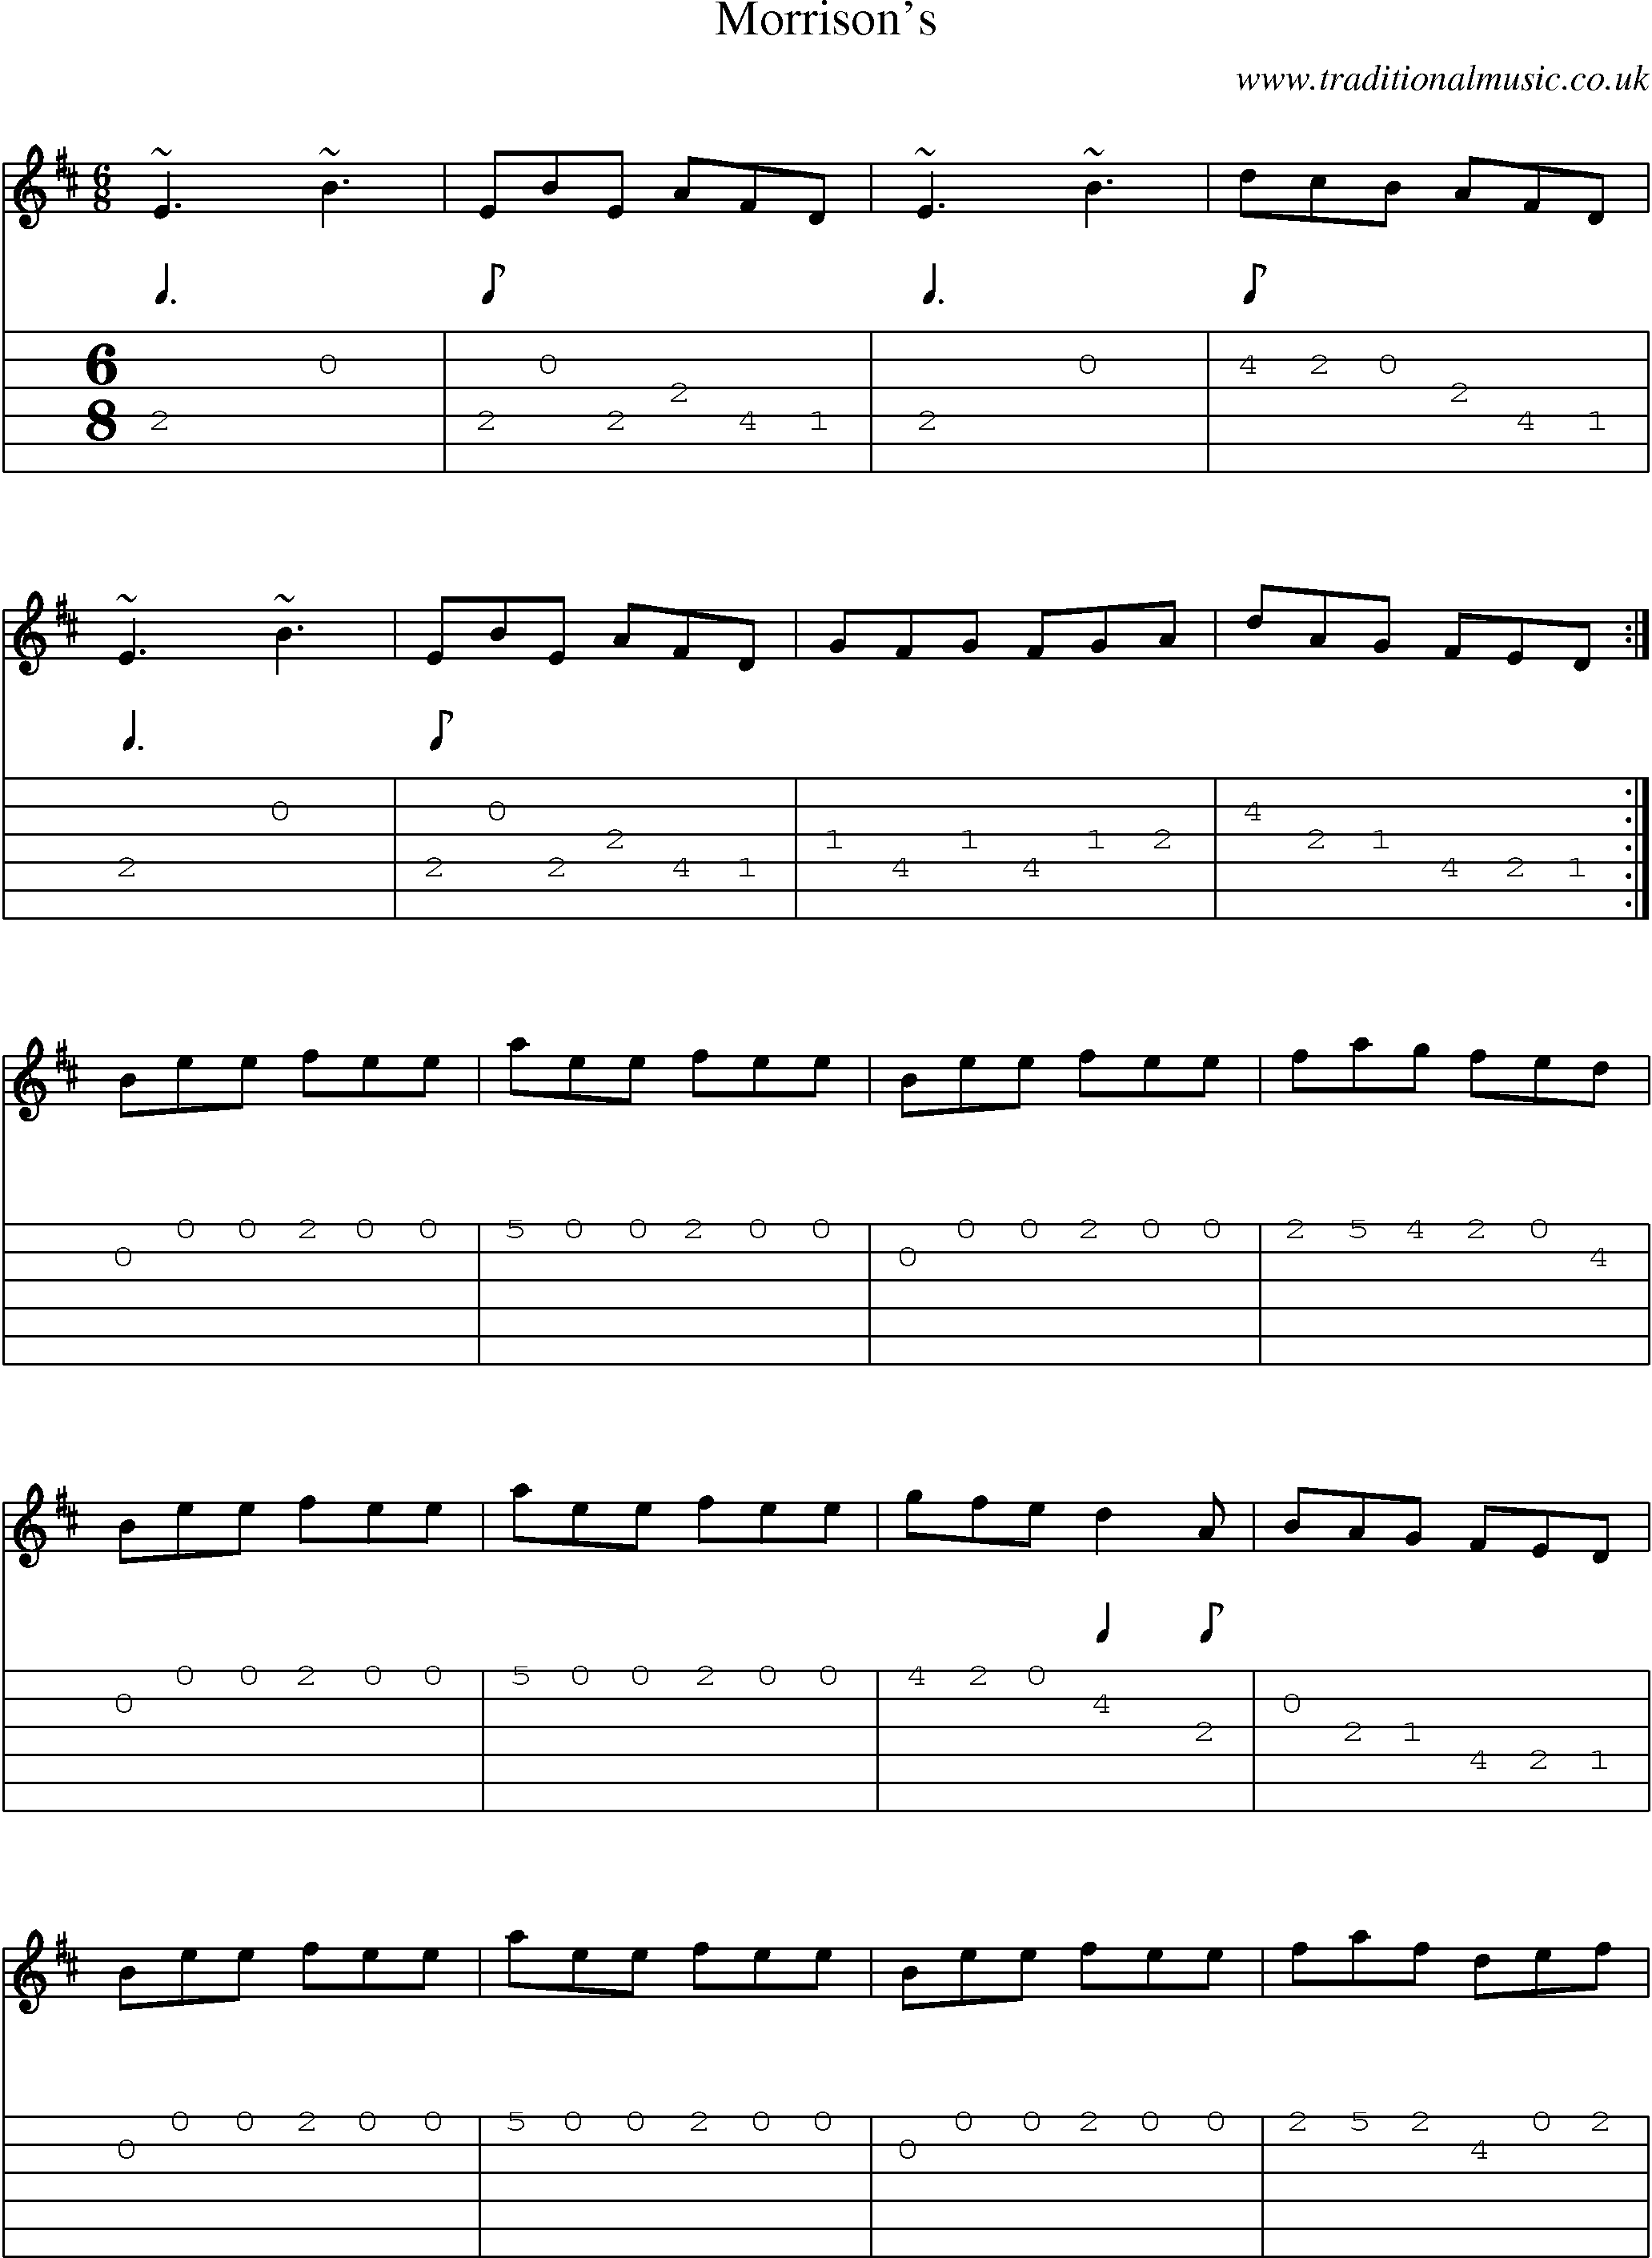 Music Score and Guitar Tabs for Morrisons